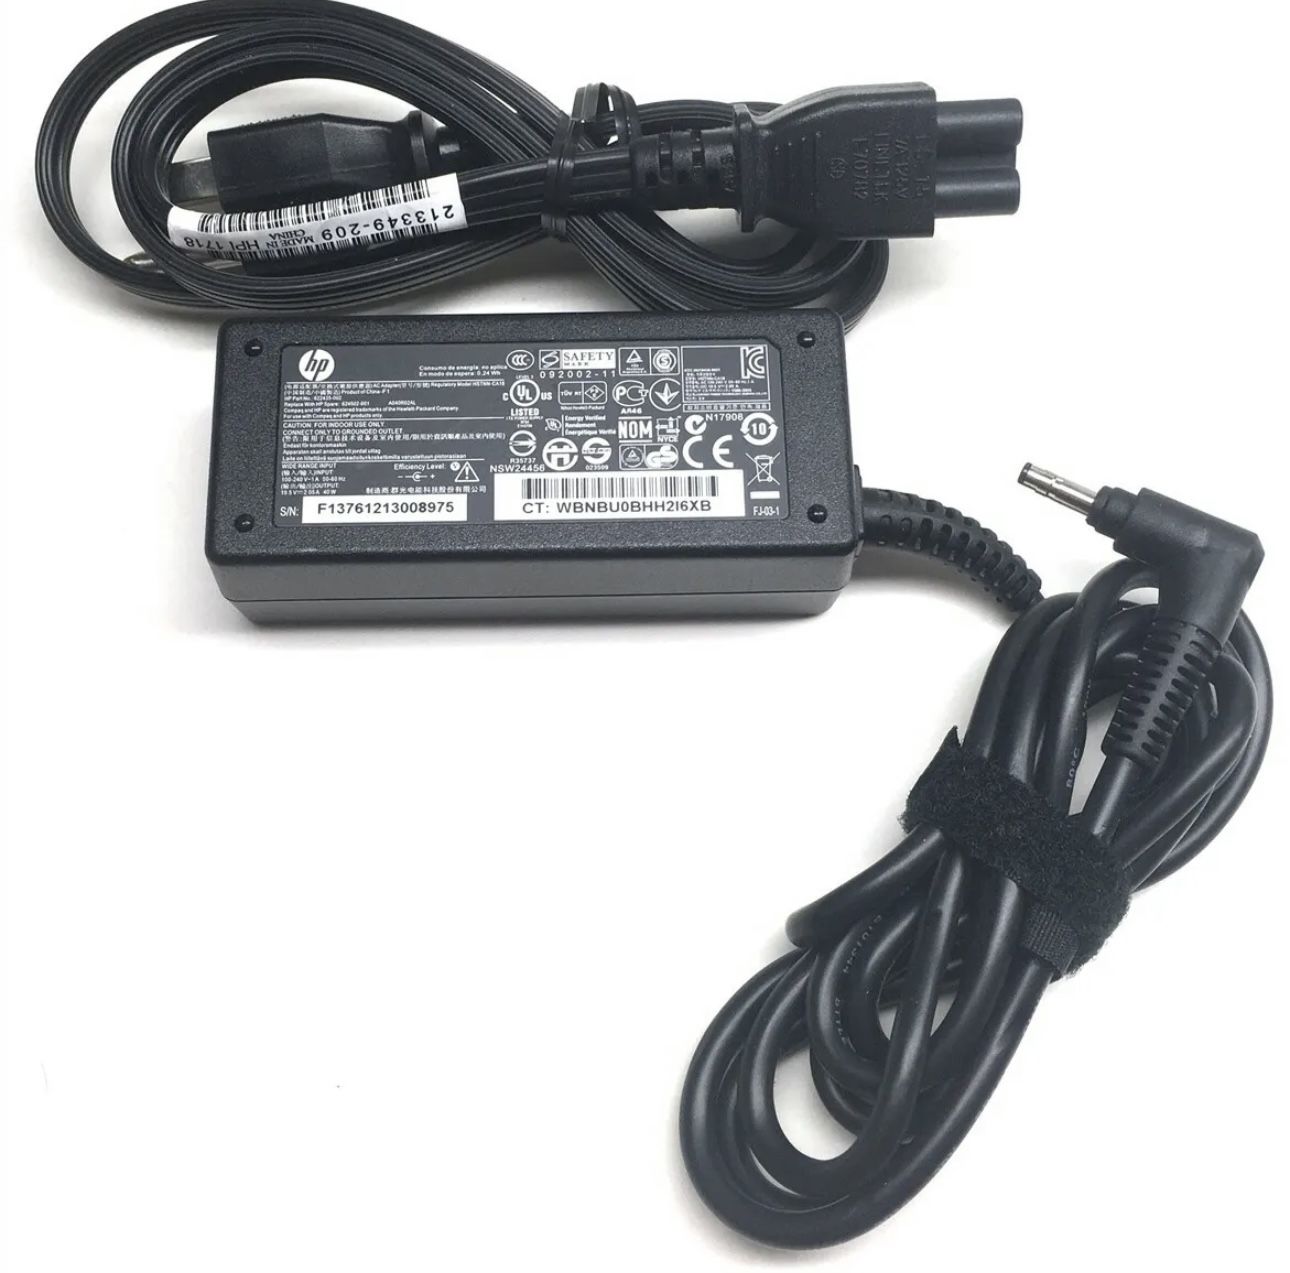 Genuine HP Laptop Charger AC Power Adapter 622435-002 624502-001 19.5V 2.05A 40W